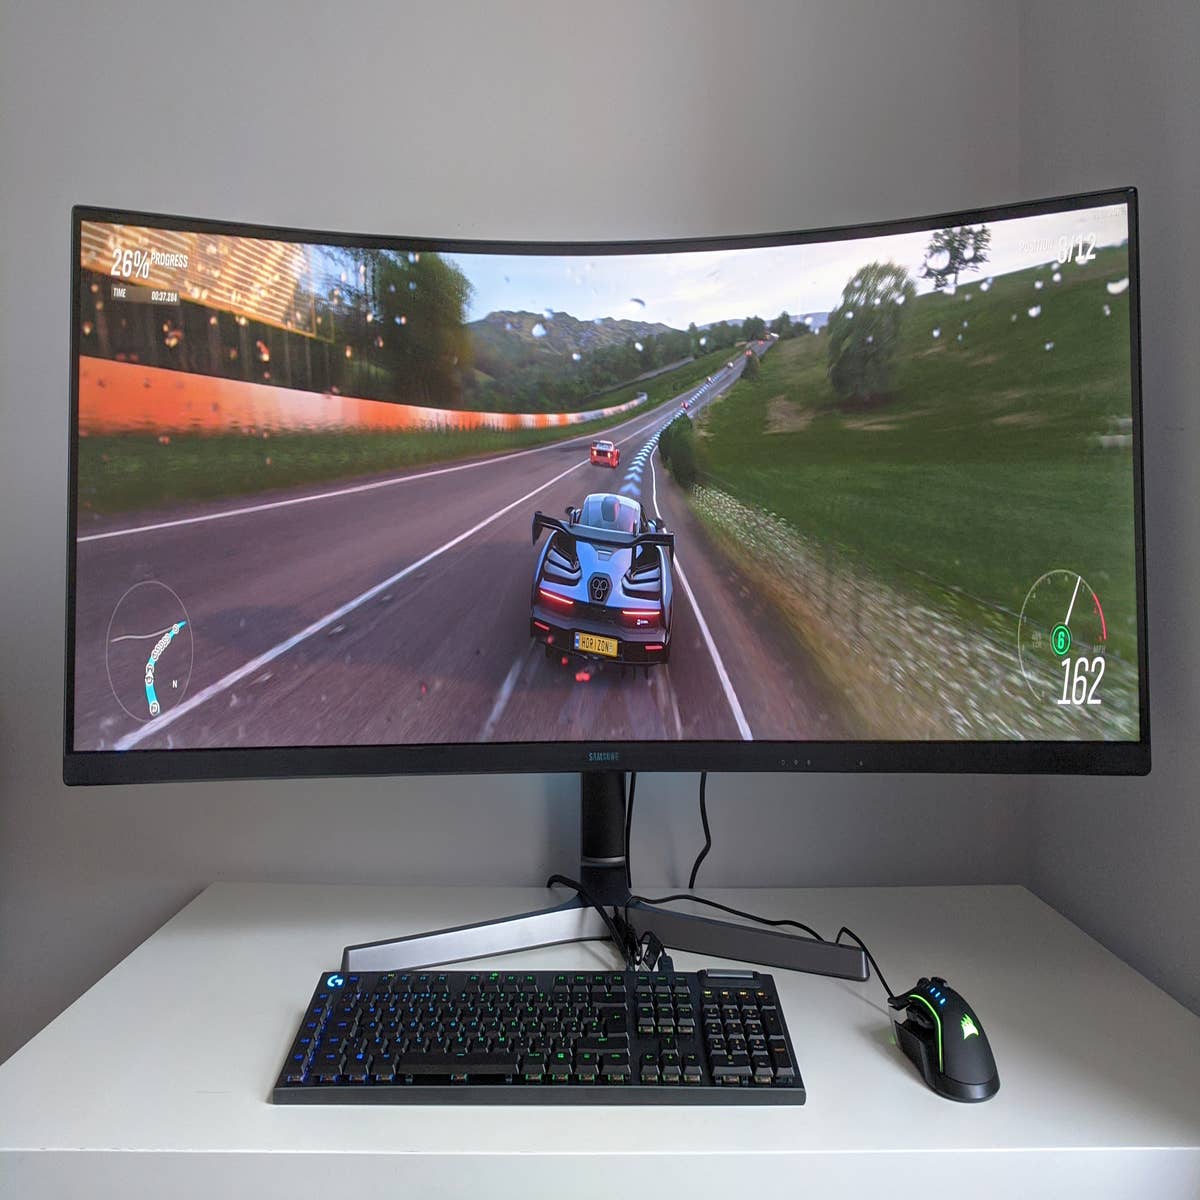 Xbox Series X might support UltraWide monitors thanks to Samsung